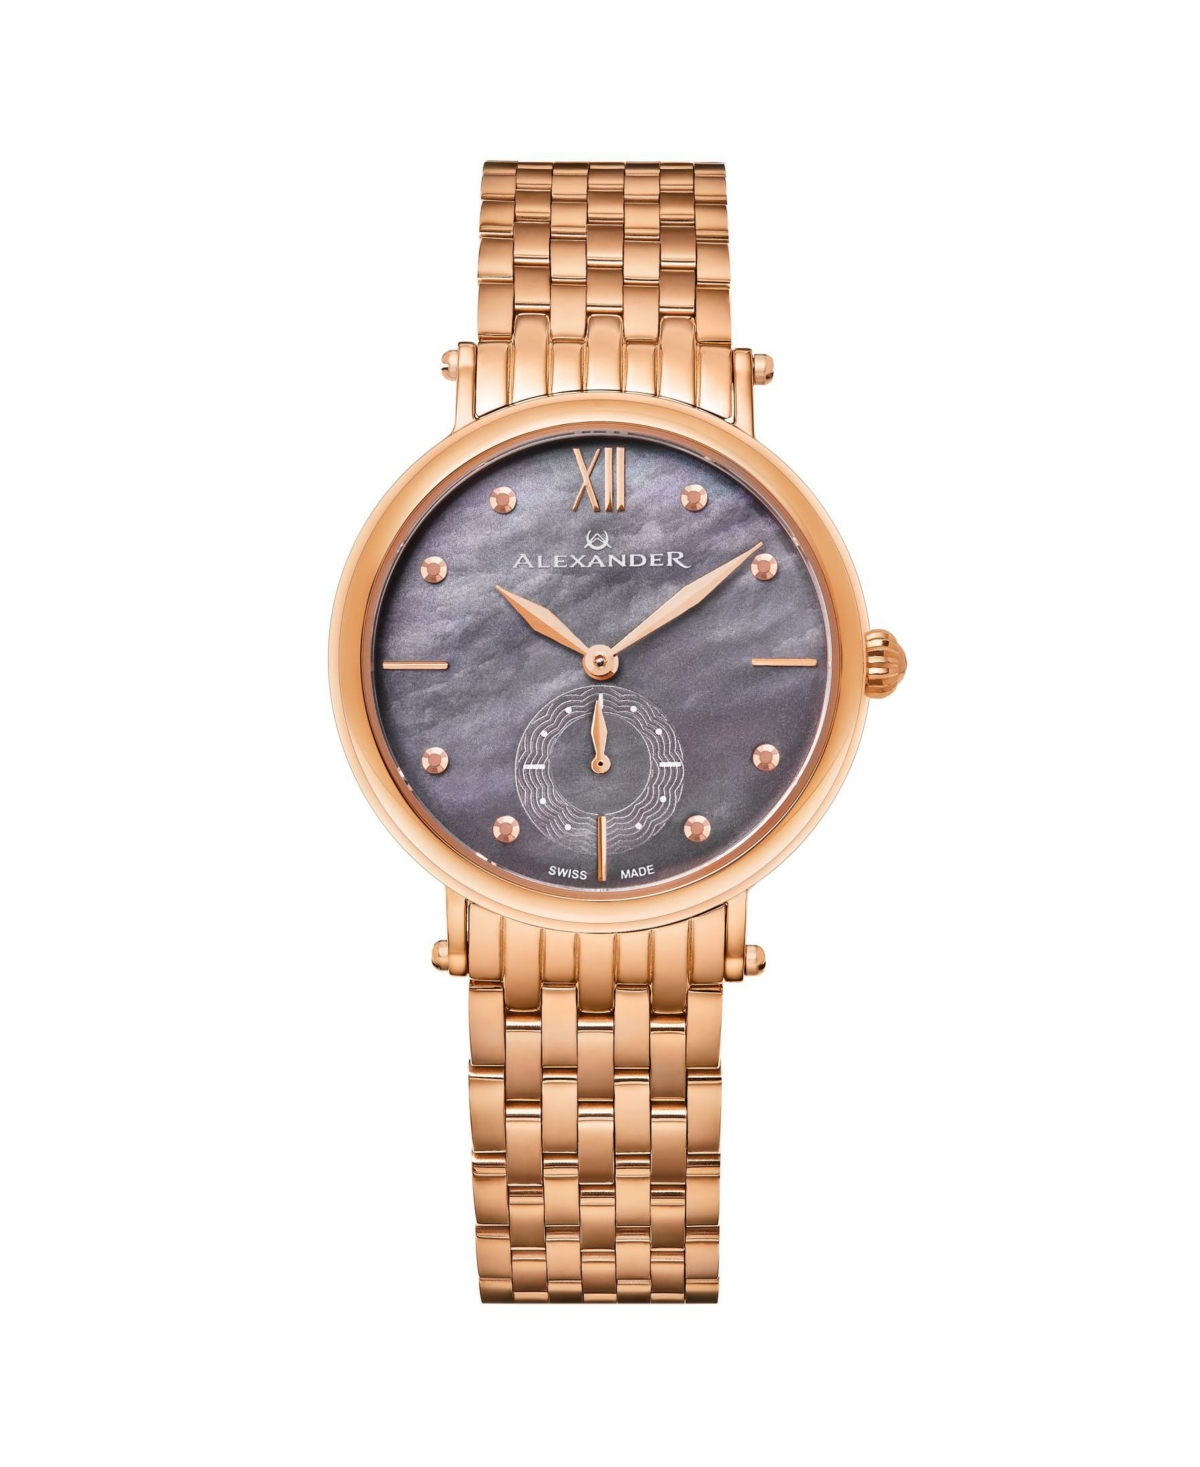 Alexander Watch A201B-04, Ladies Quartz Small-Second Watch with Rose Gold Tone Stainless Steel Case on Rose Gold Tone Stainless Steel Bracelet - Rose